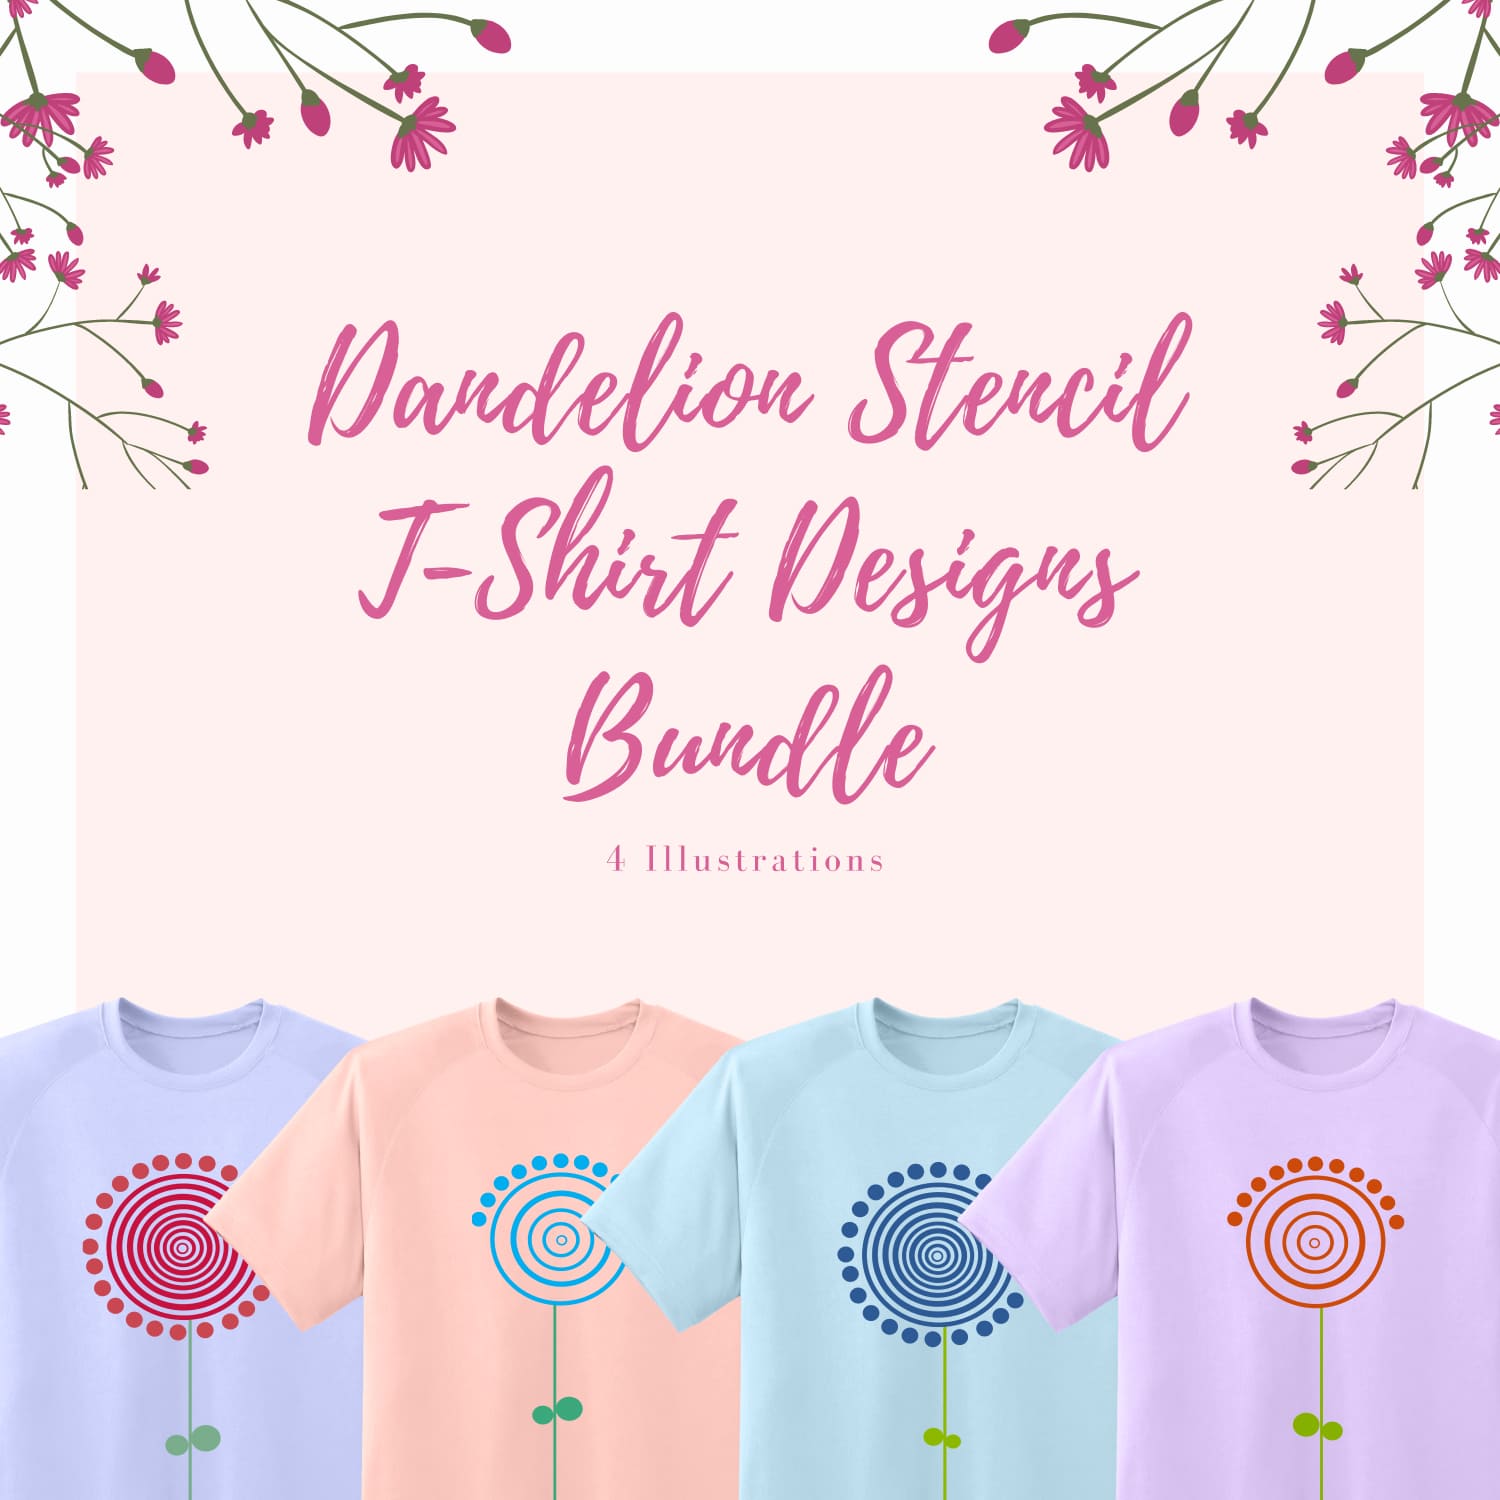 Collection from images of t-shirts with irresistible dandelion prints.